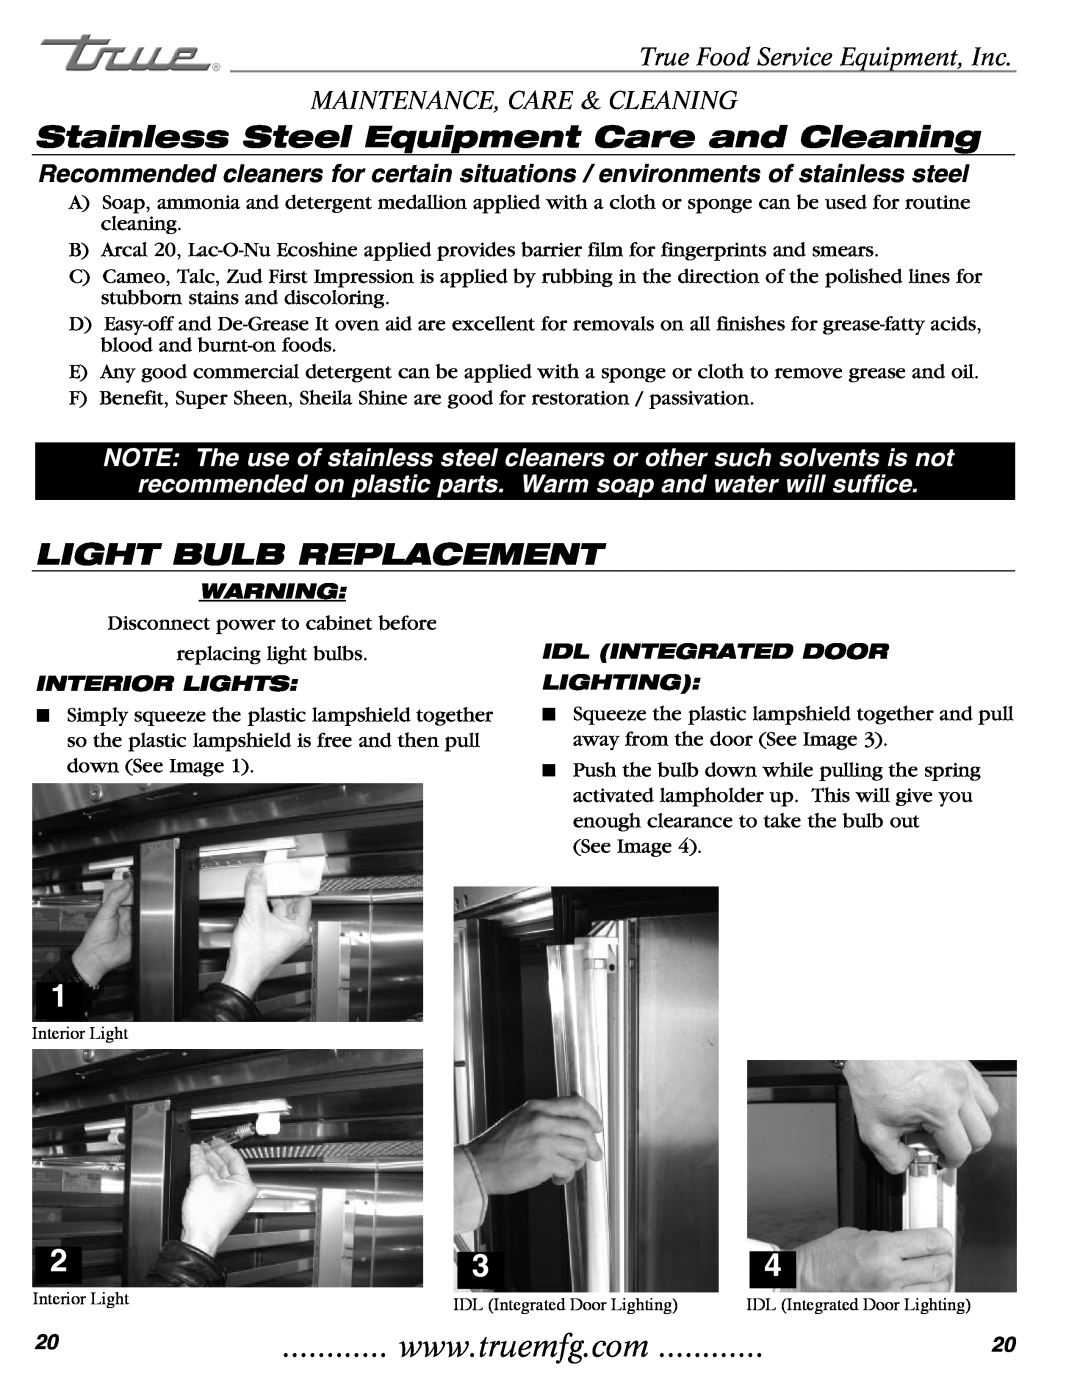 True Manufacturing Company TR1RRI-1S Light Bulb Replacement, Disconnect power to cabinet before, replacing light bulbs 